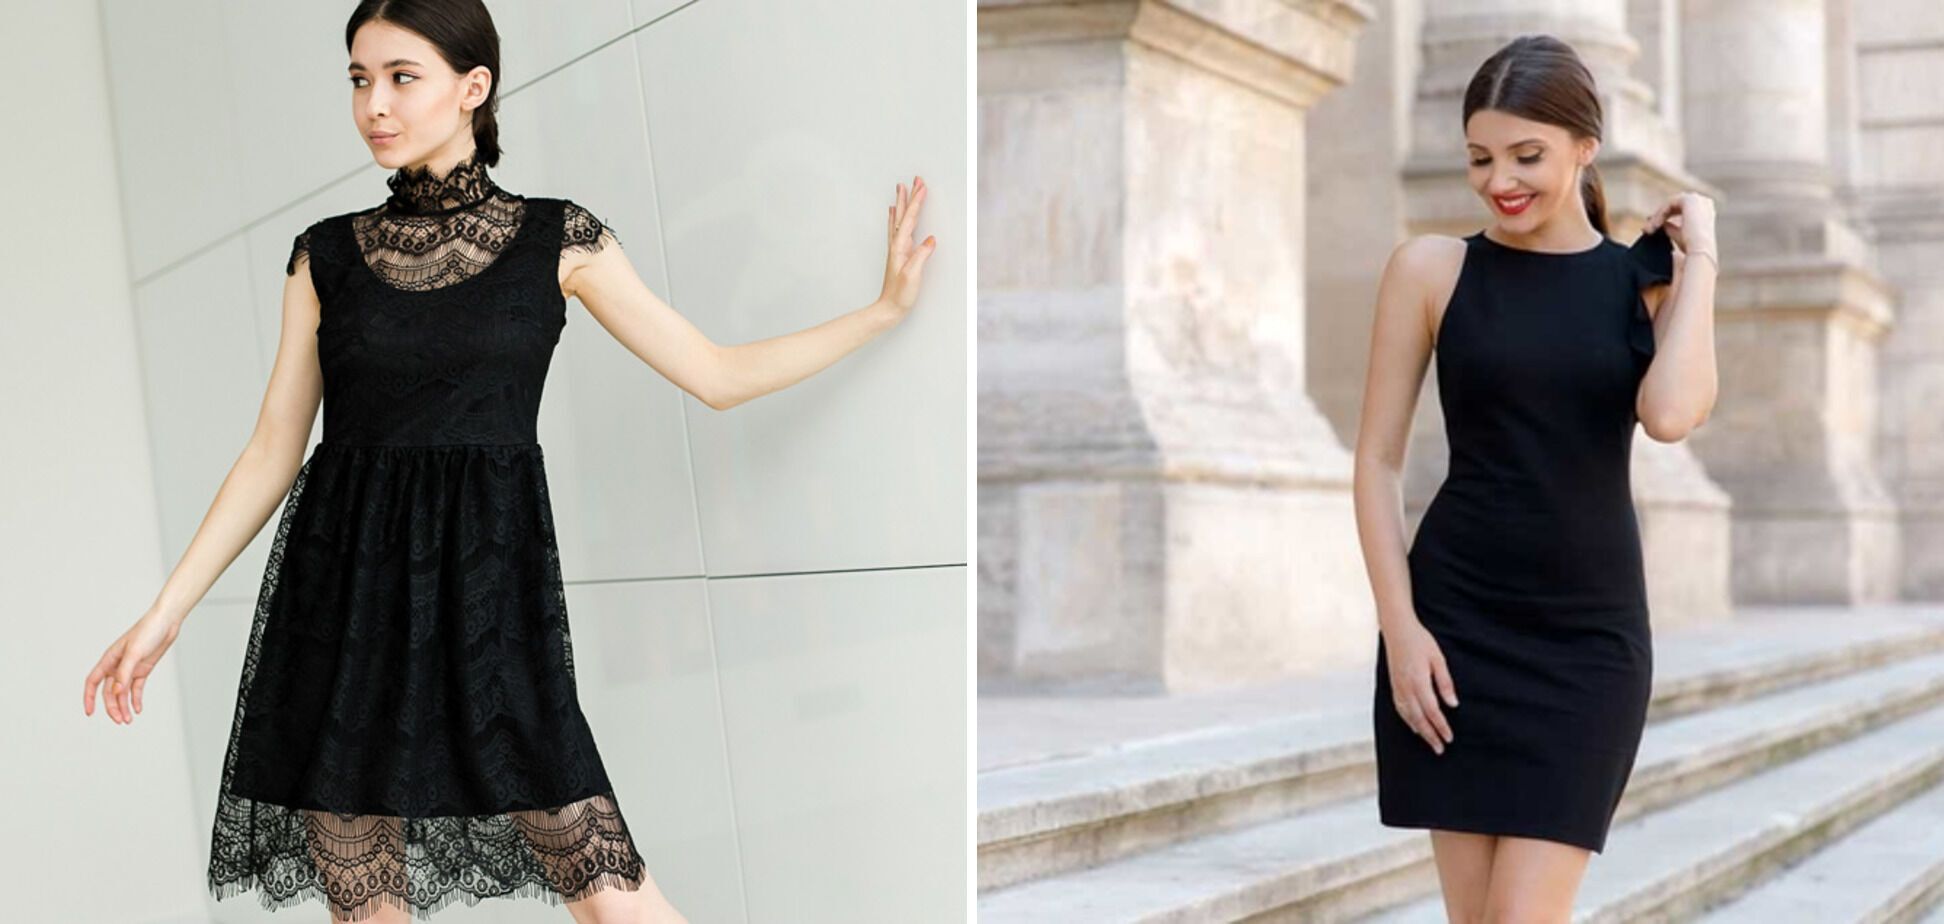 Why Chanel's little black dress has never gone out of fashion